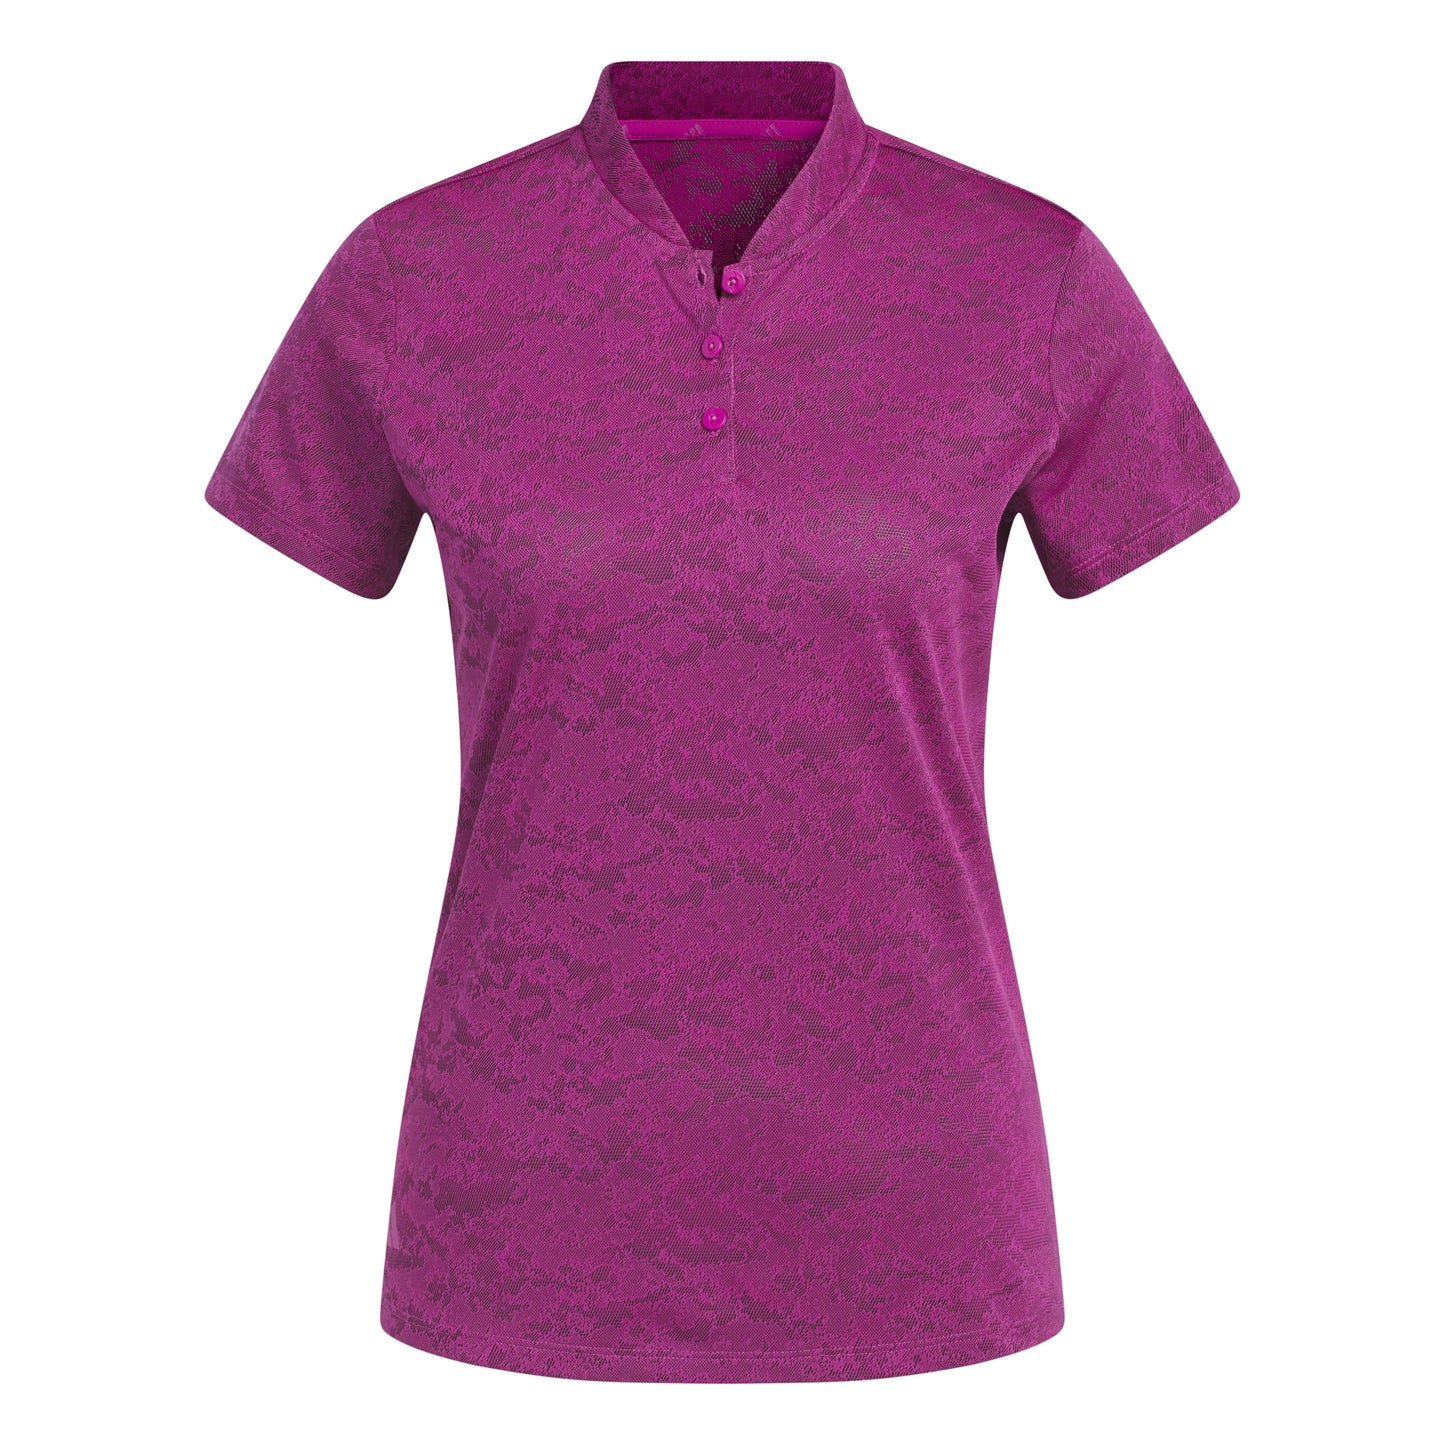 adidas Ladies Short Sleeve Golf Polo with Jacquard Lace Print